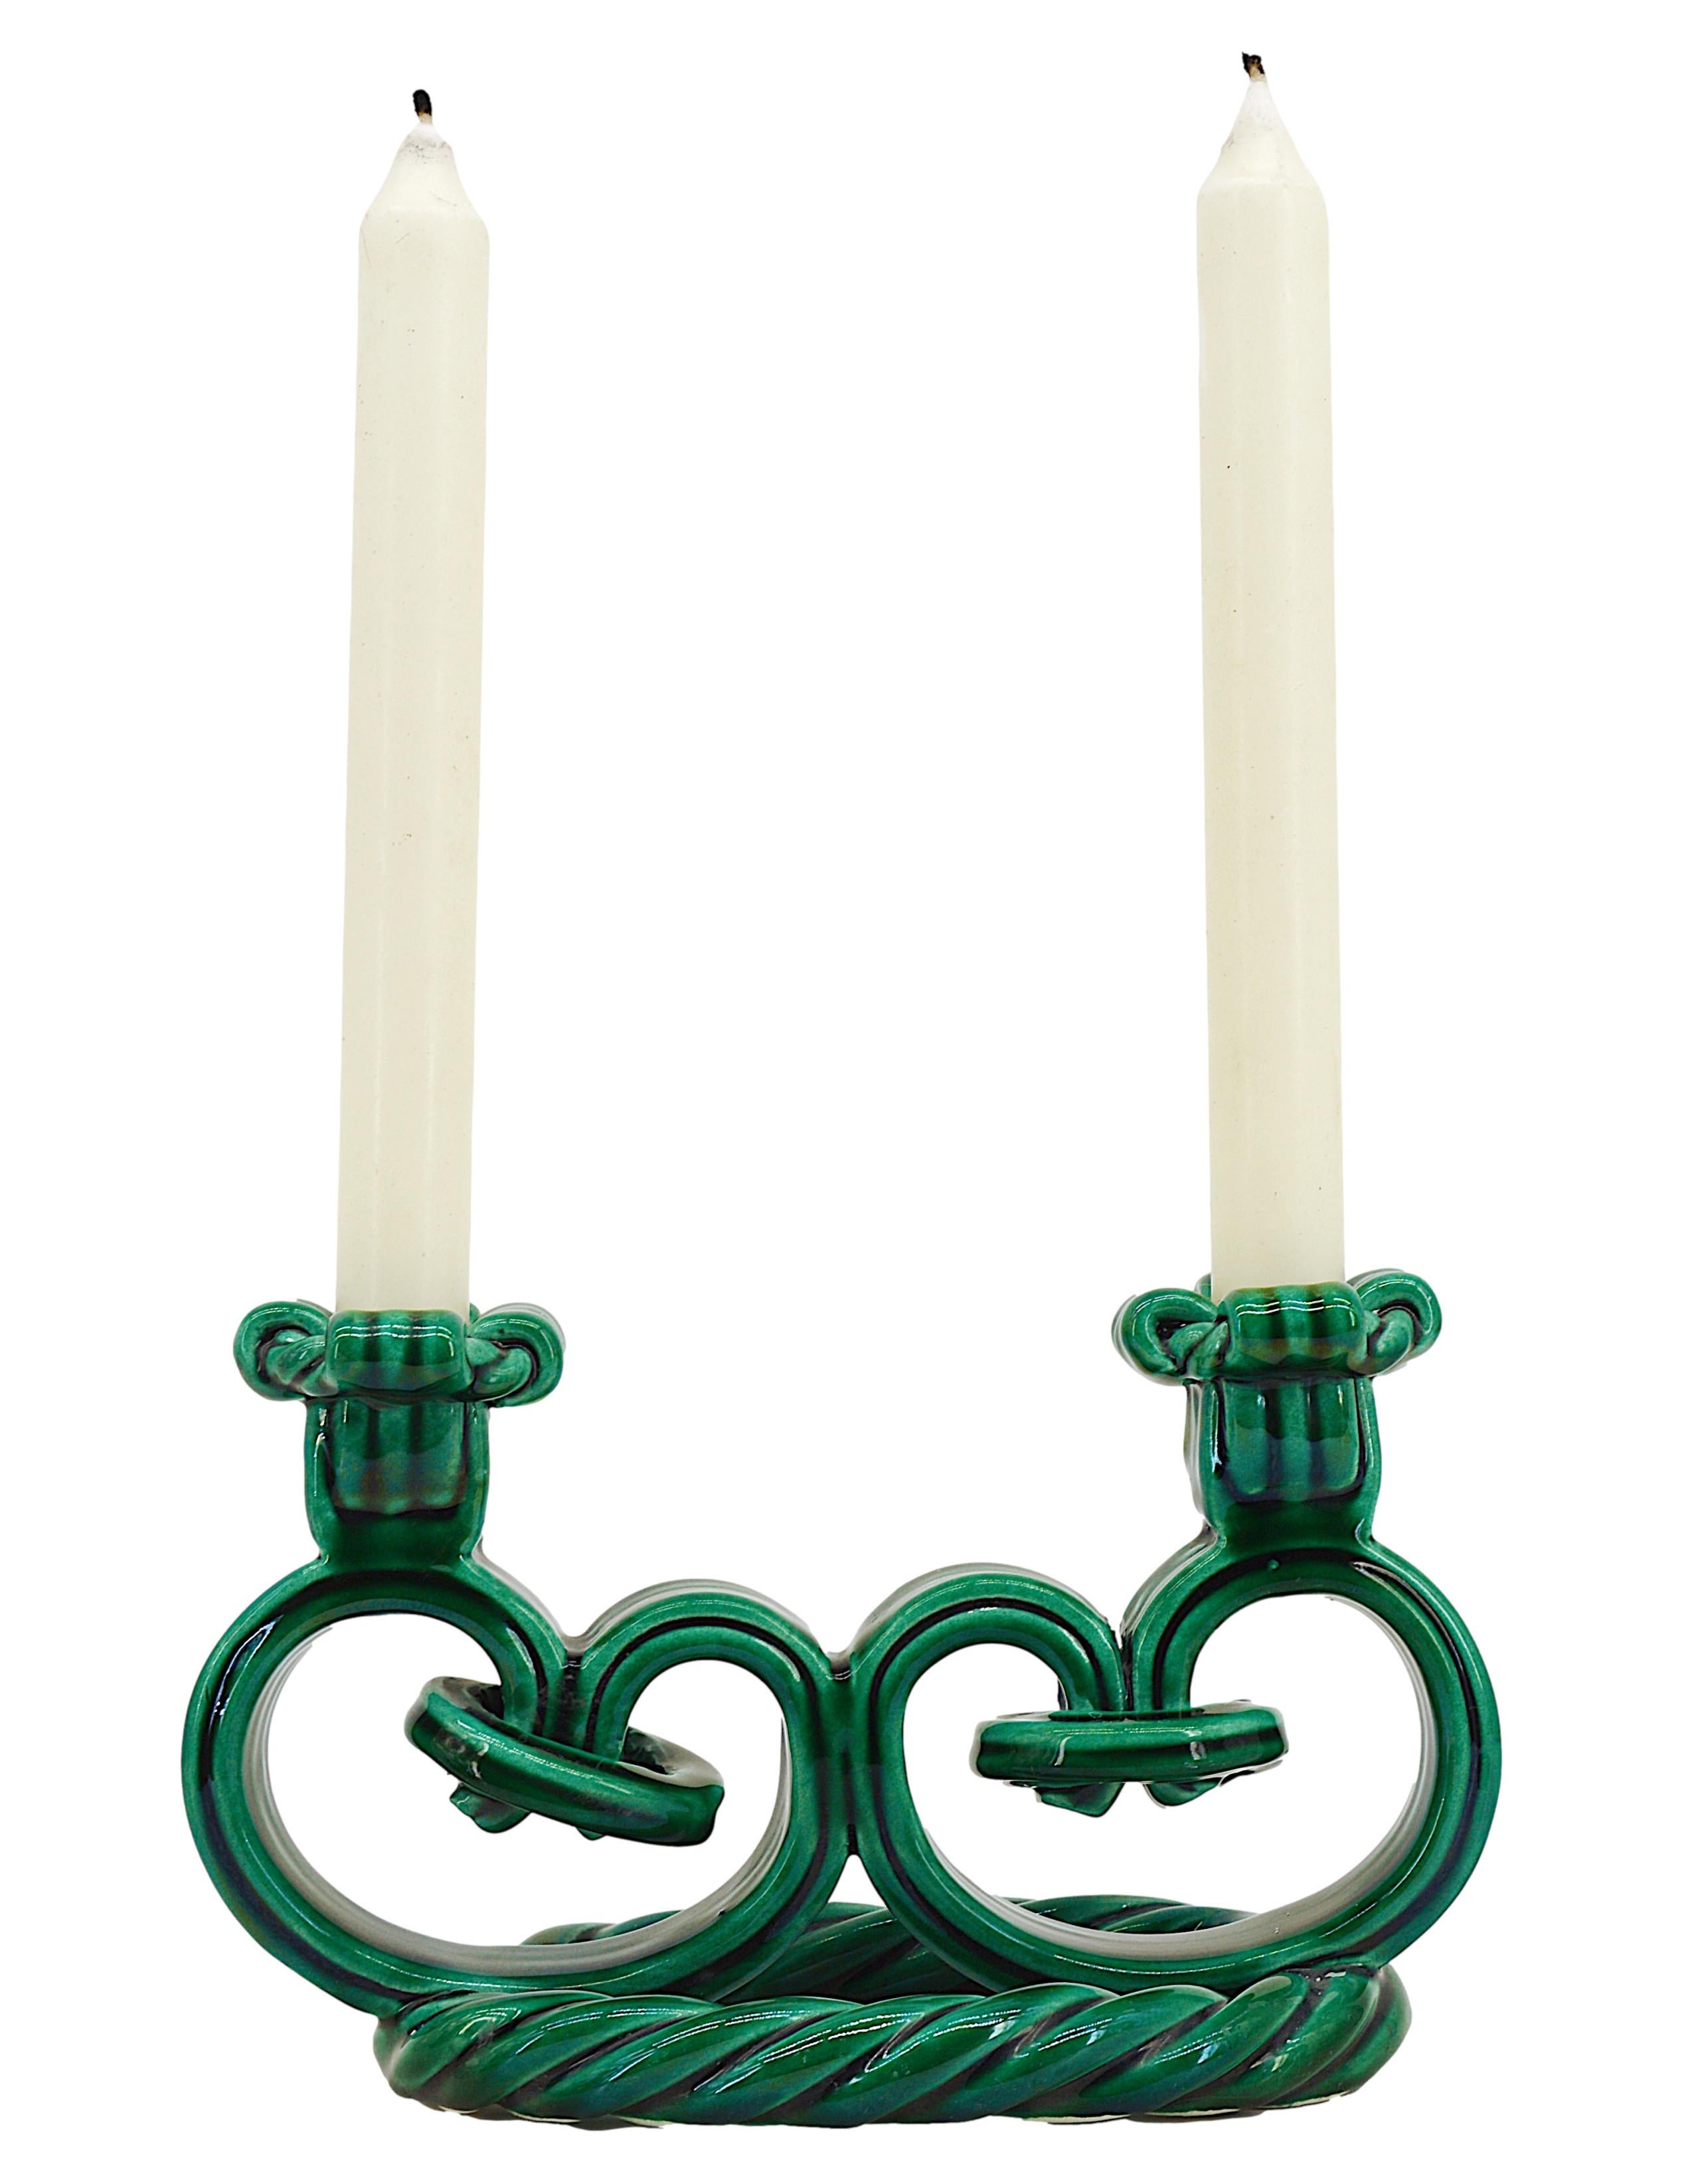 Pair of candlesticks made at Vallauris, France, 1940s. Ceramic. Representation of braided candlesticks, Classic design from this period of the 40s. Very close to the work of Jérome Massier. Each - Width: 8.9